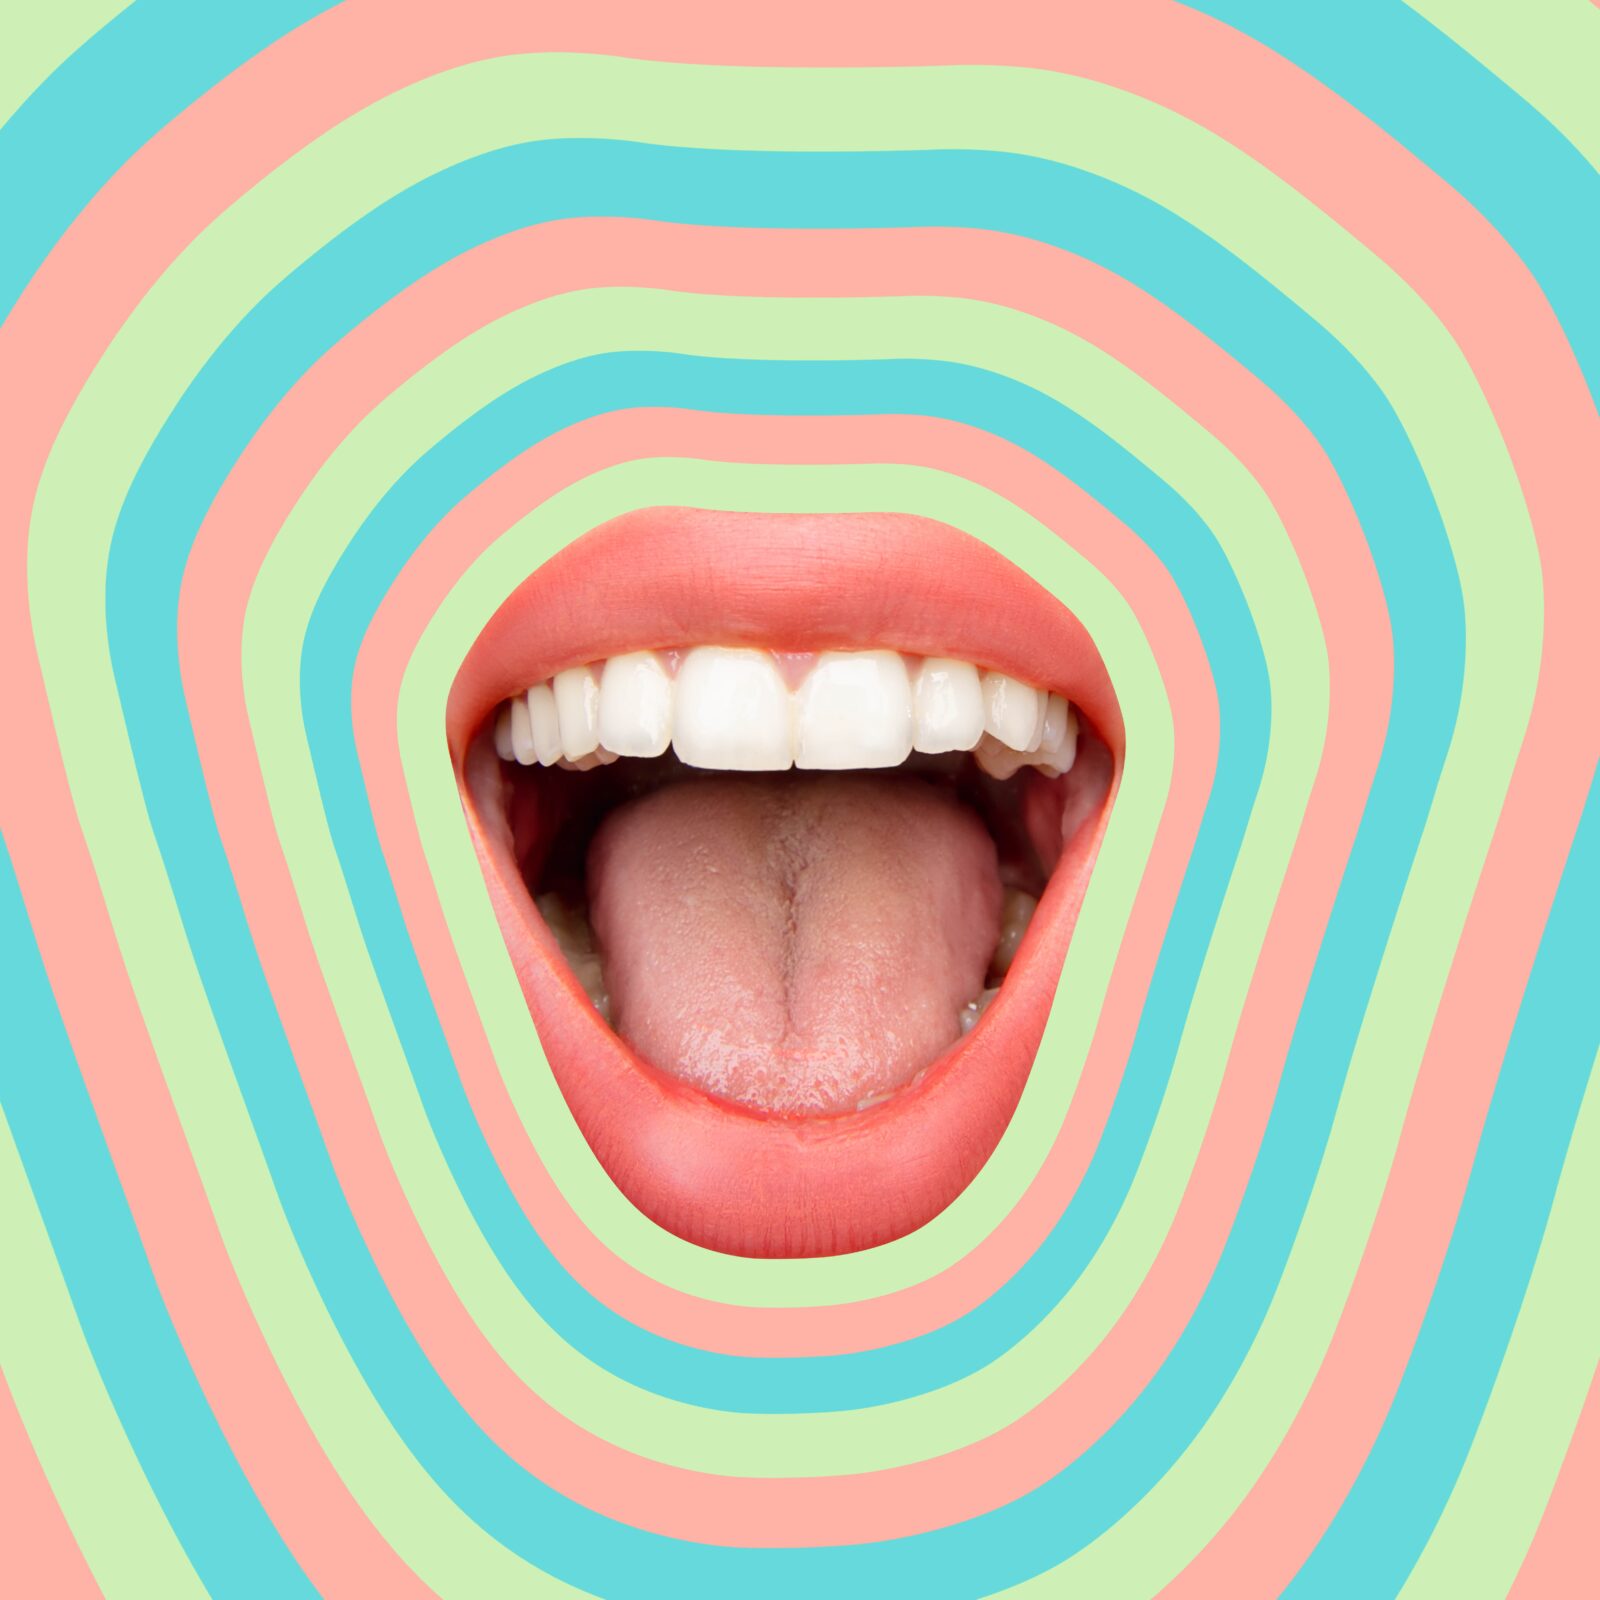 mouth smiling surrounded by color